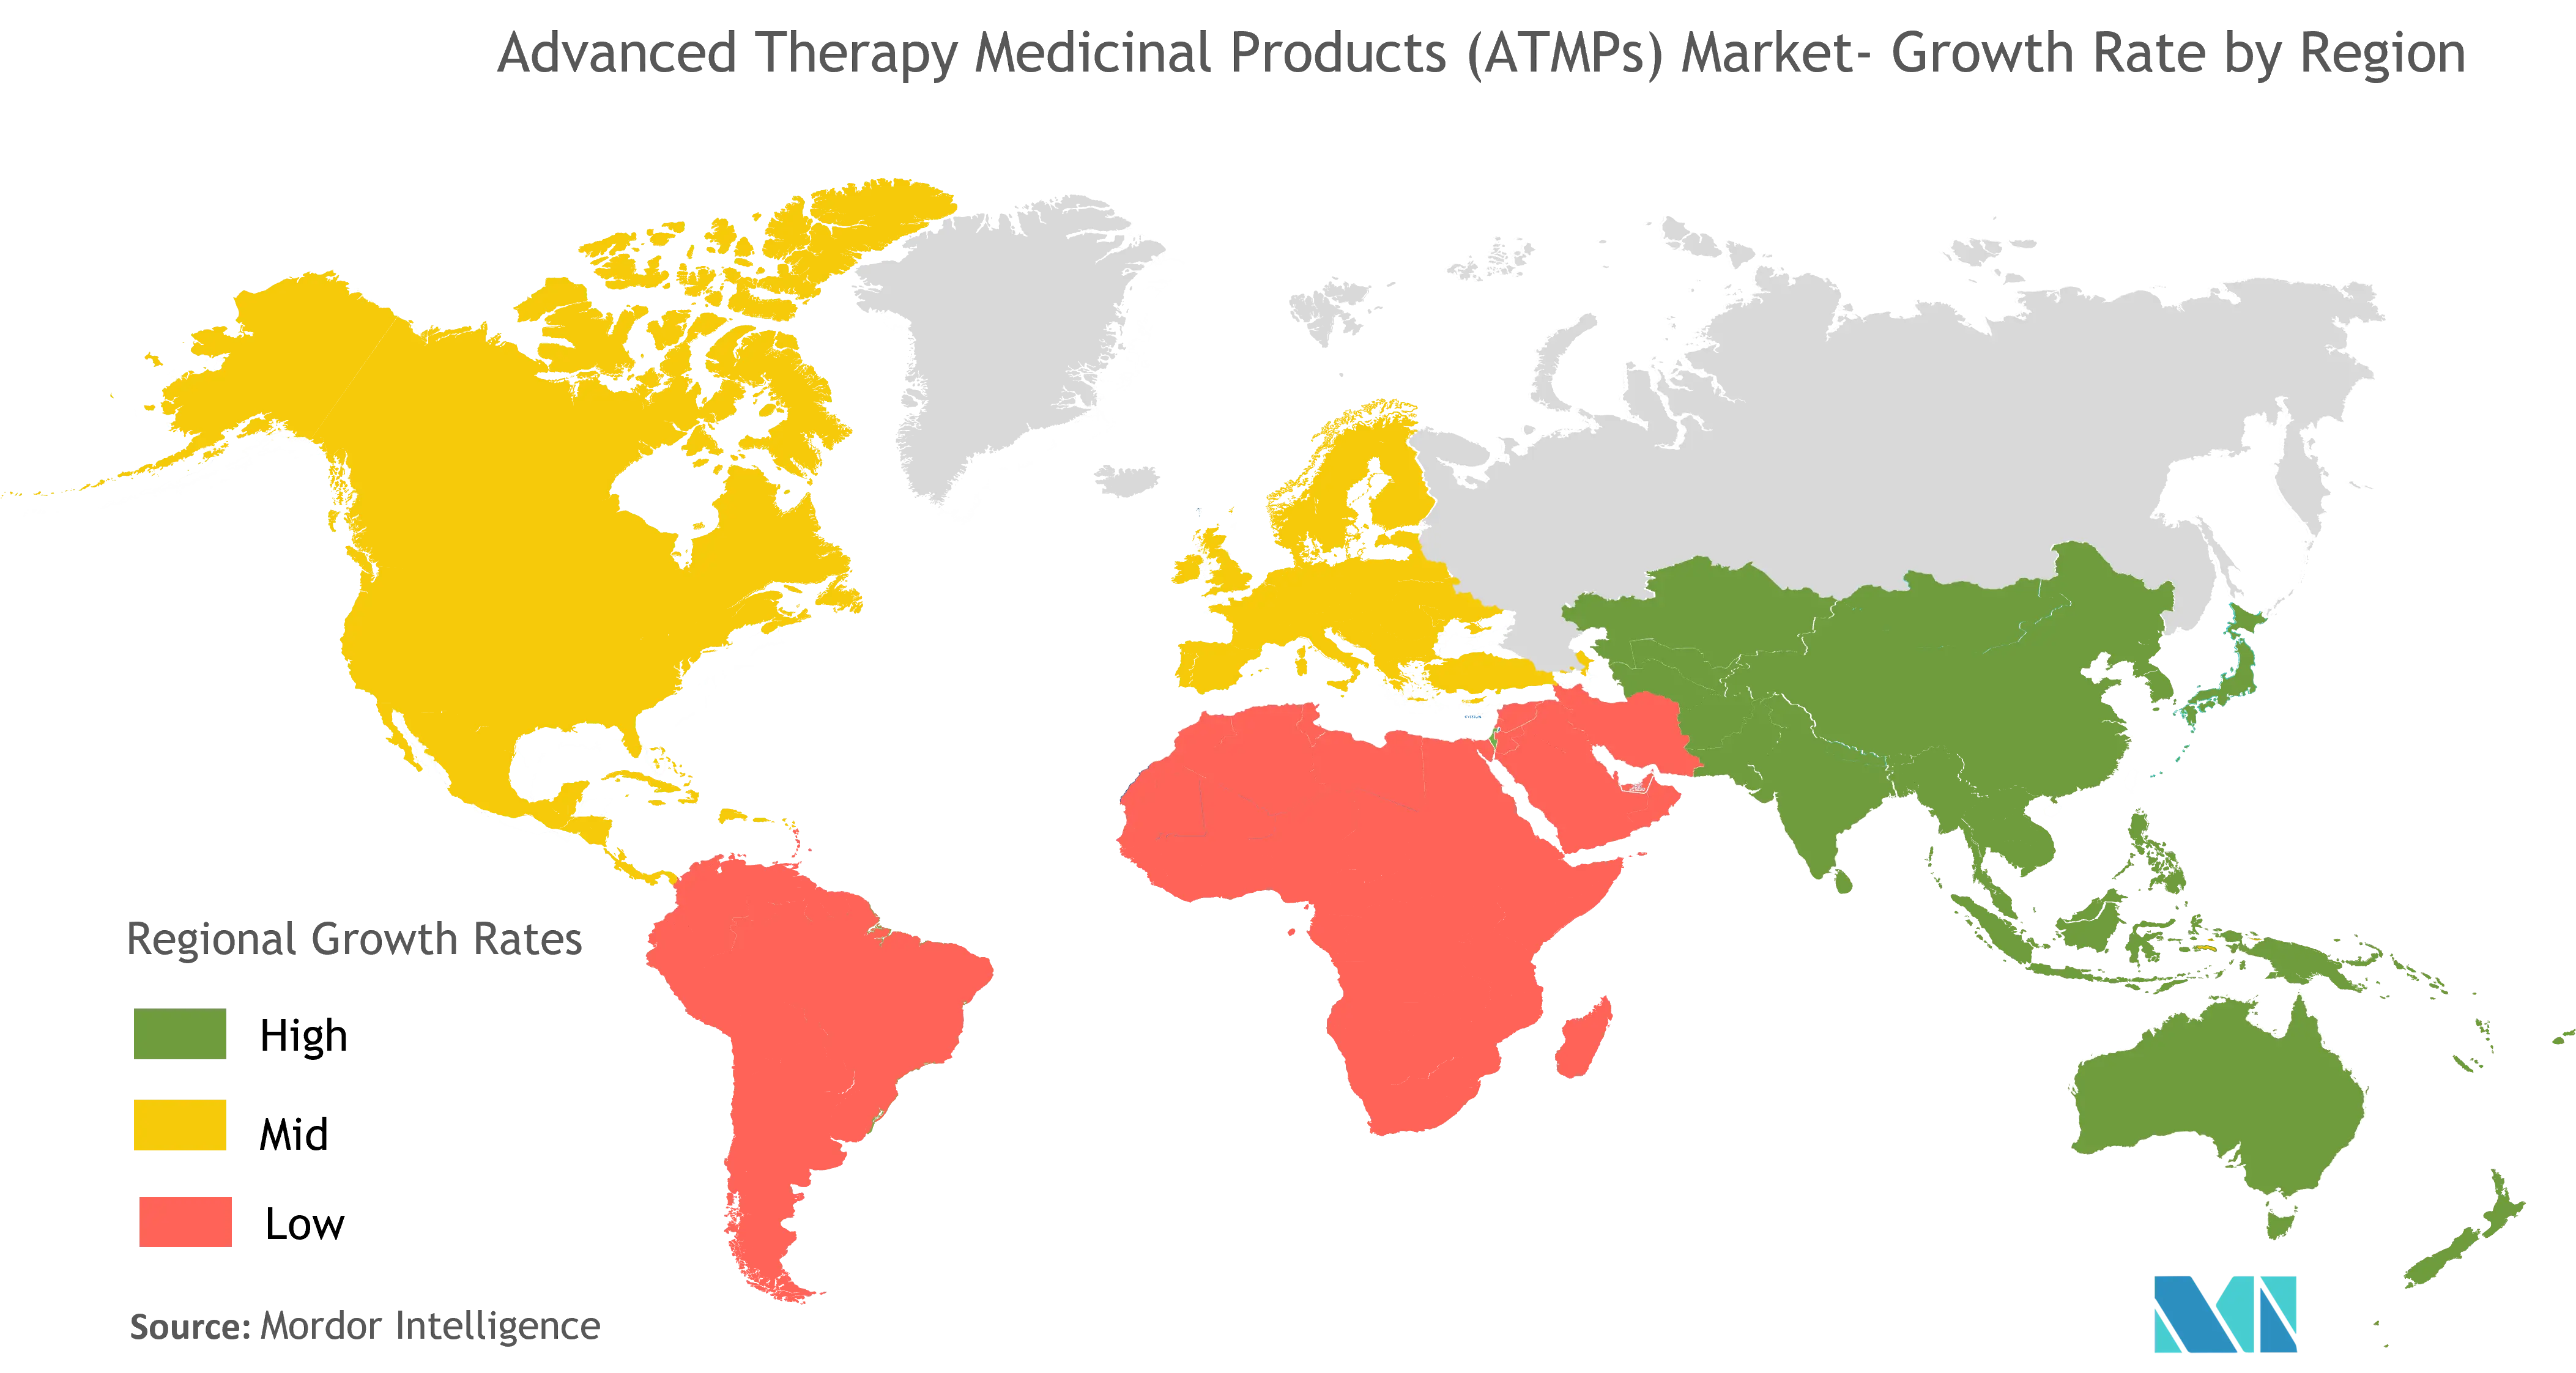 Advanced Therapy Medicinal Products Market Growth